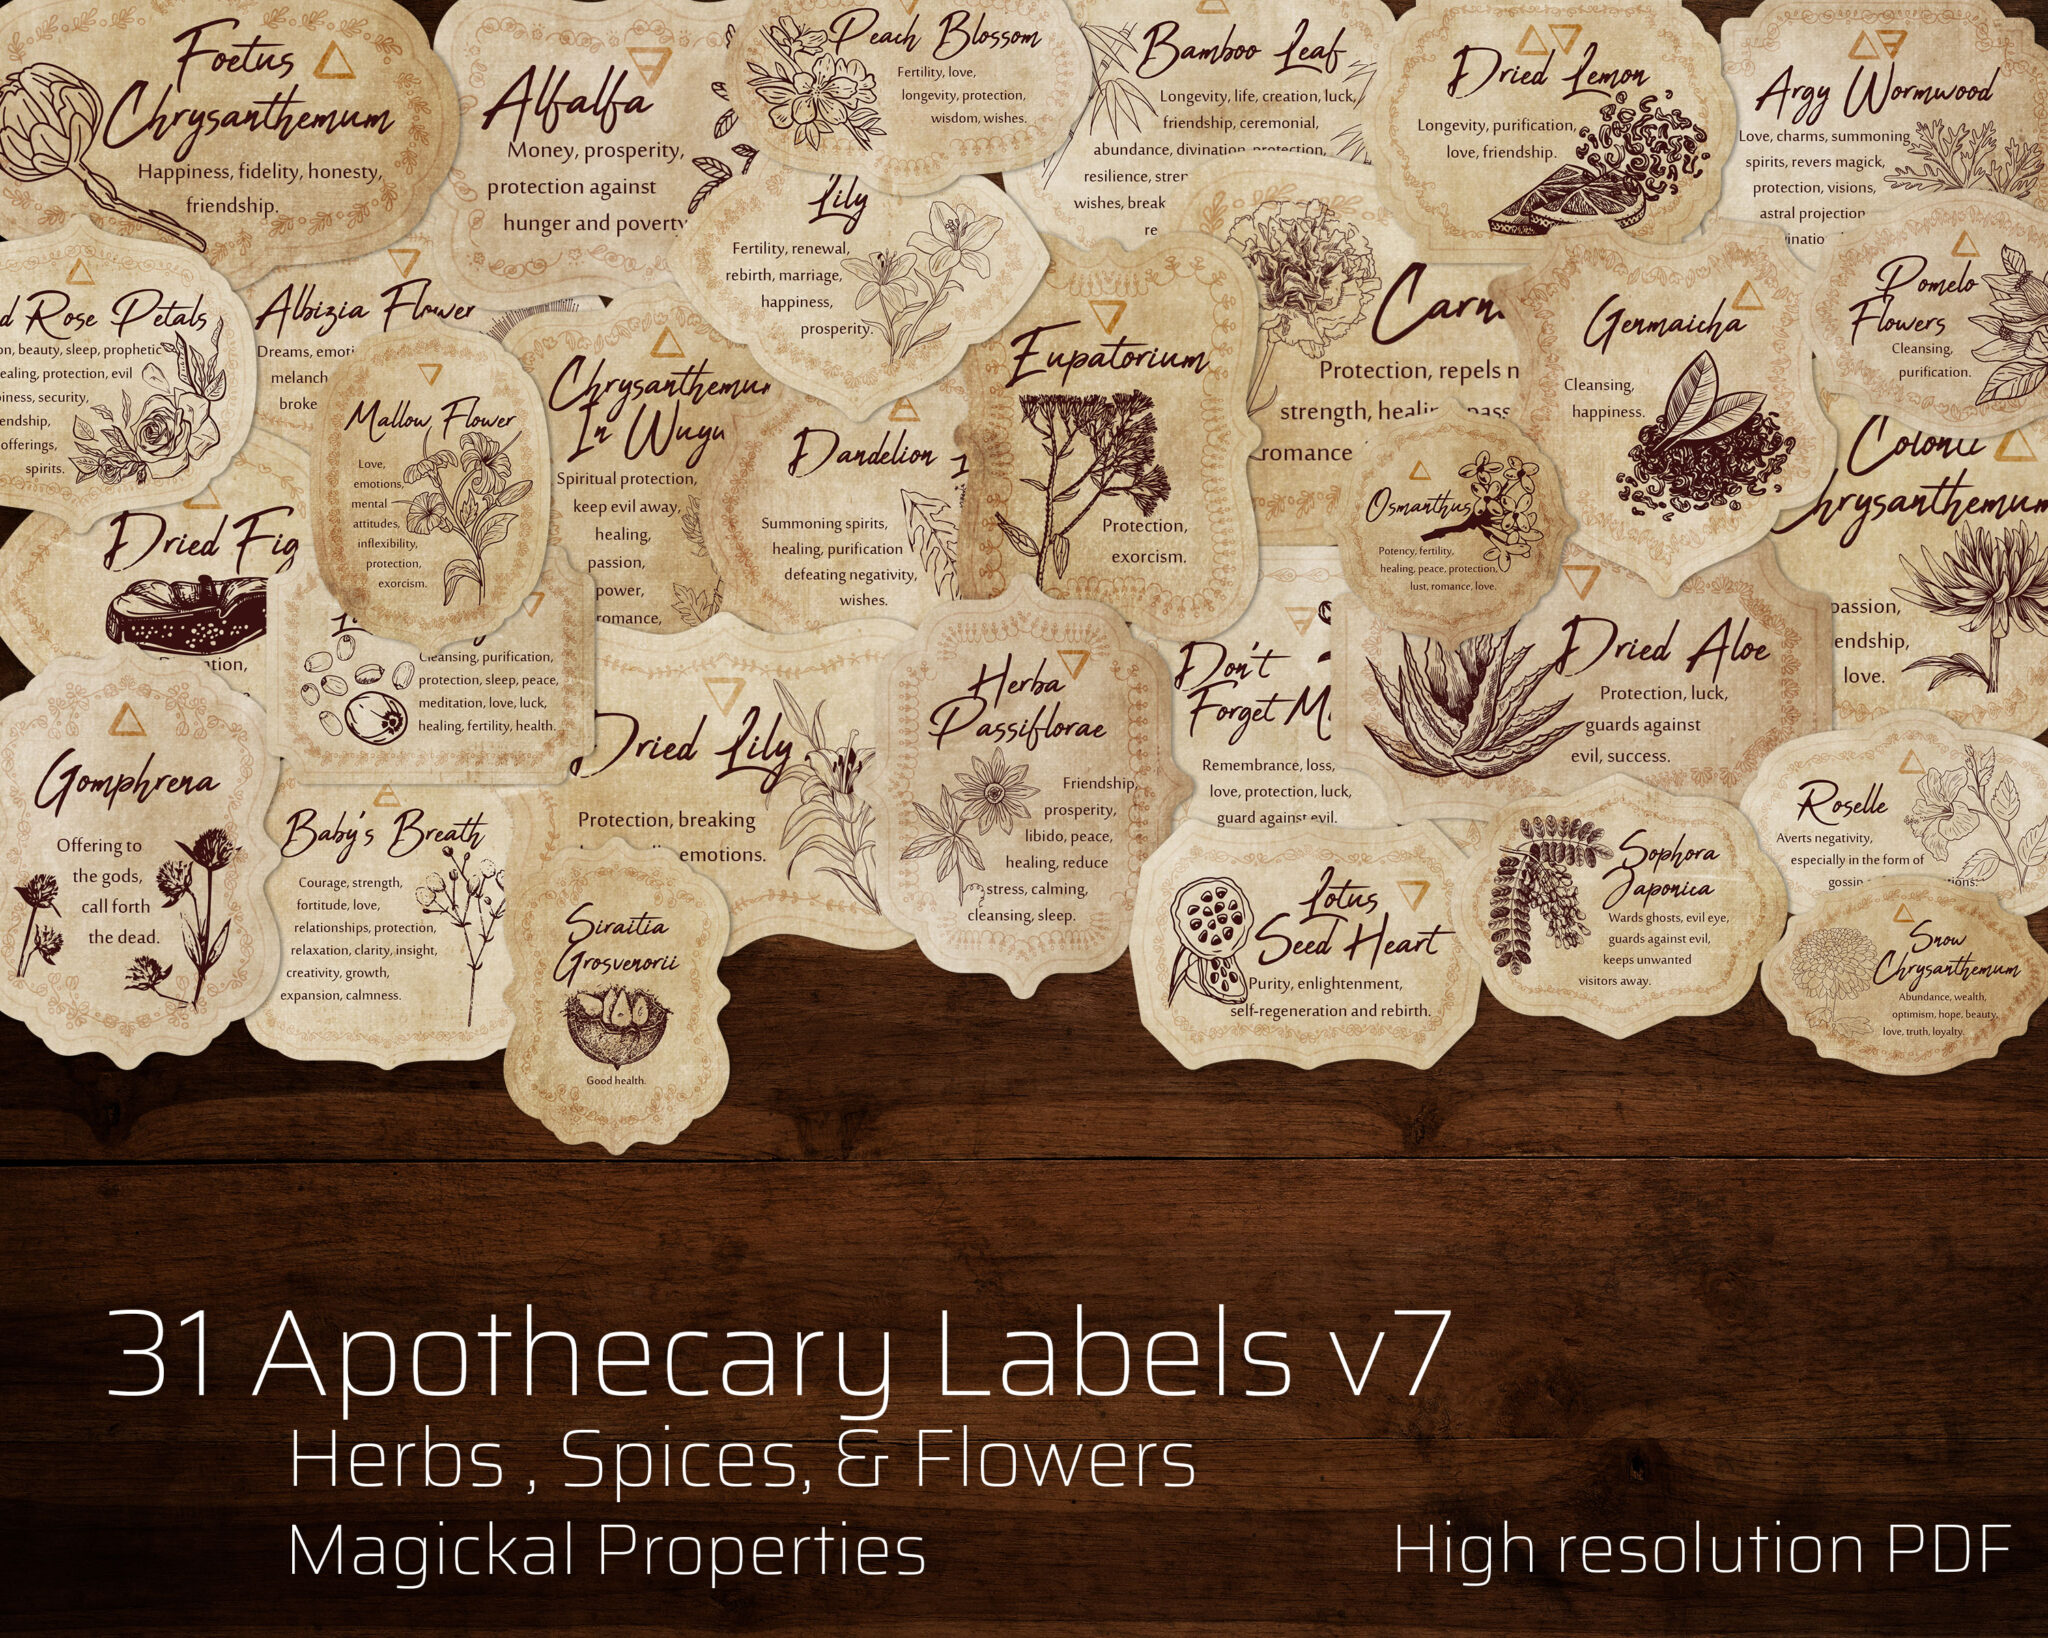 Jar Labels Herb & Spices v7 Apothecary Labels - MagikCharms